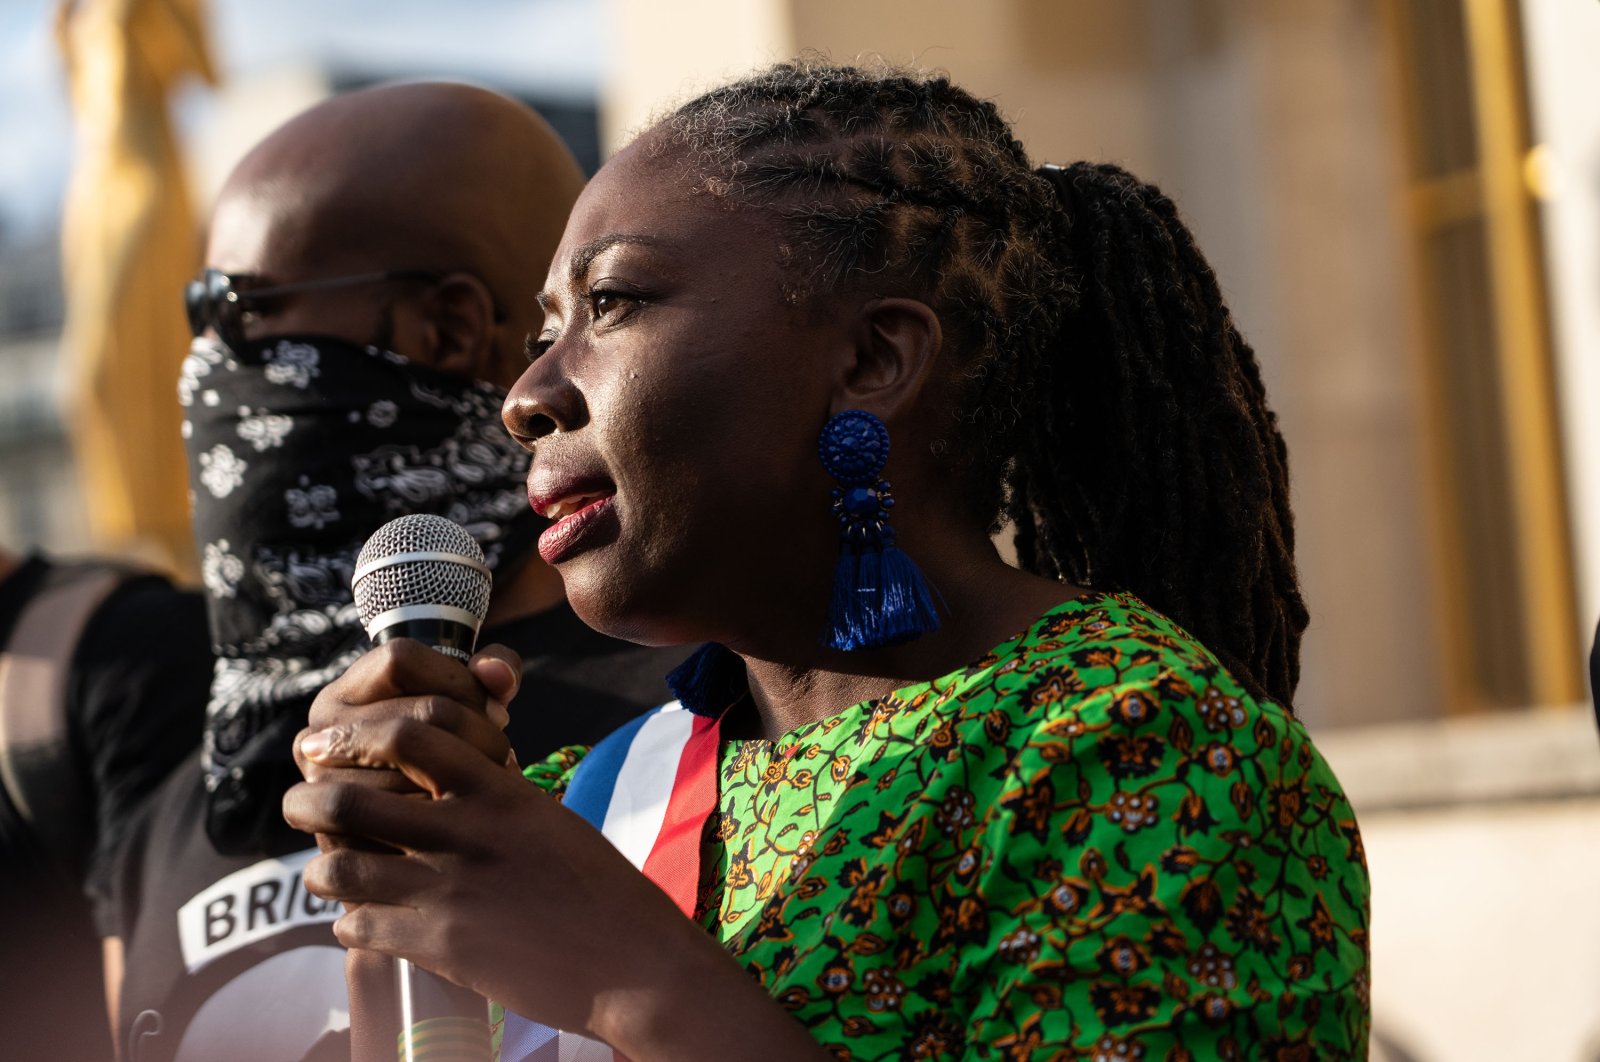 Daniele Obono at the microphone during a support rally organized for her at the Trocadero, Paris, France, on Sept. 5, 2020. (Reuters Photo)